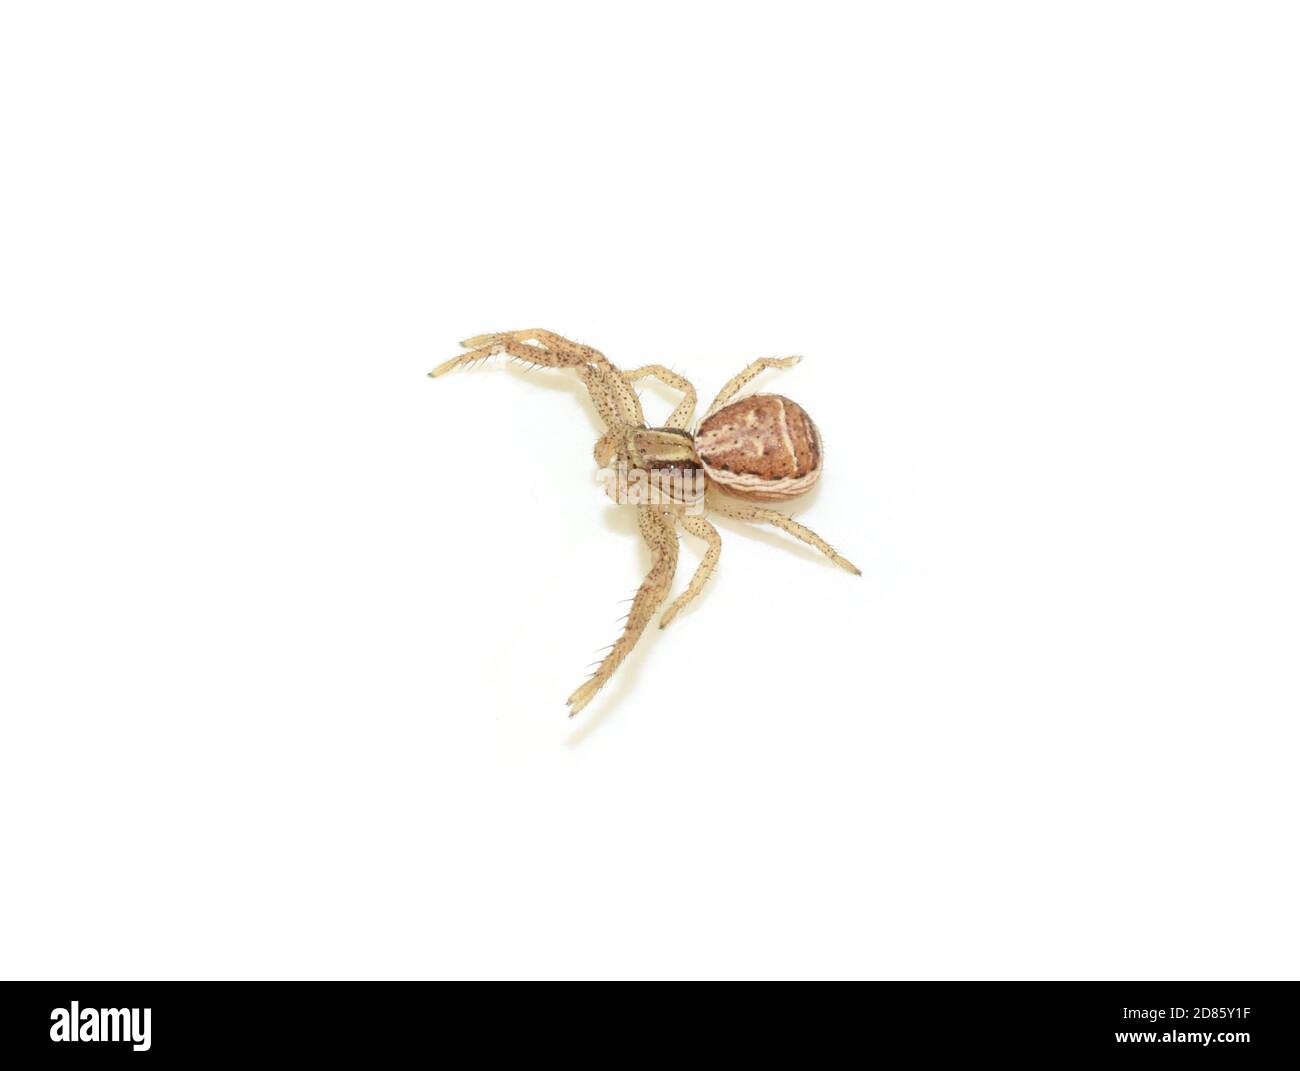 The small crab spider Xysticus ulmi i Stock Photo